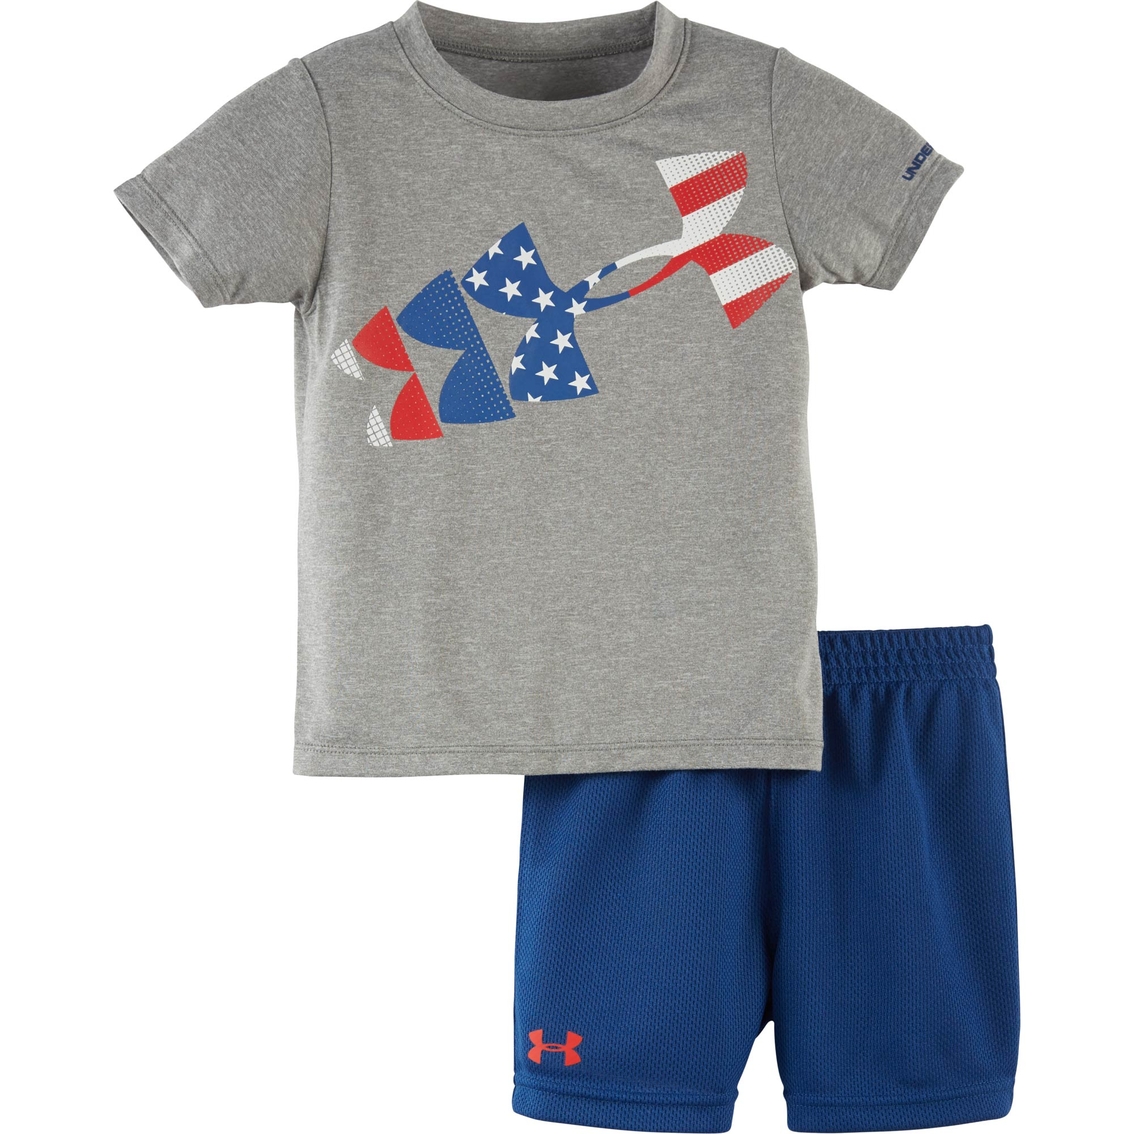 under armour for infants and toddlers